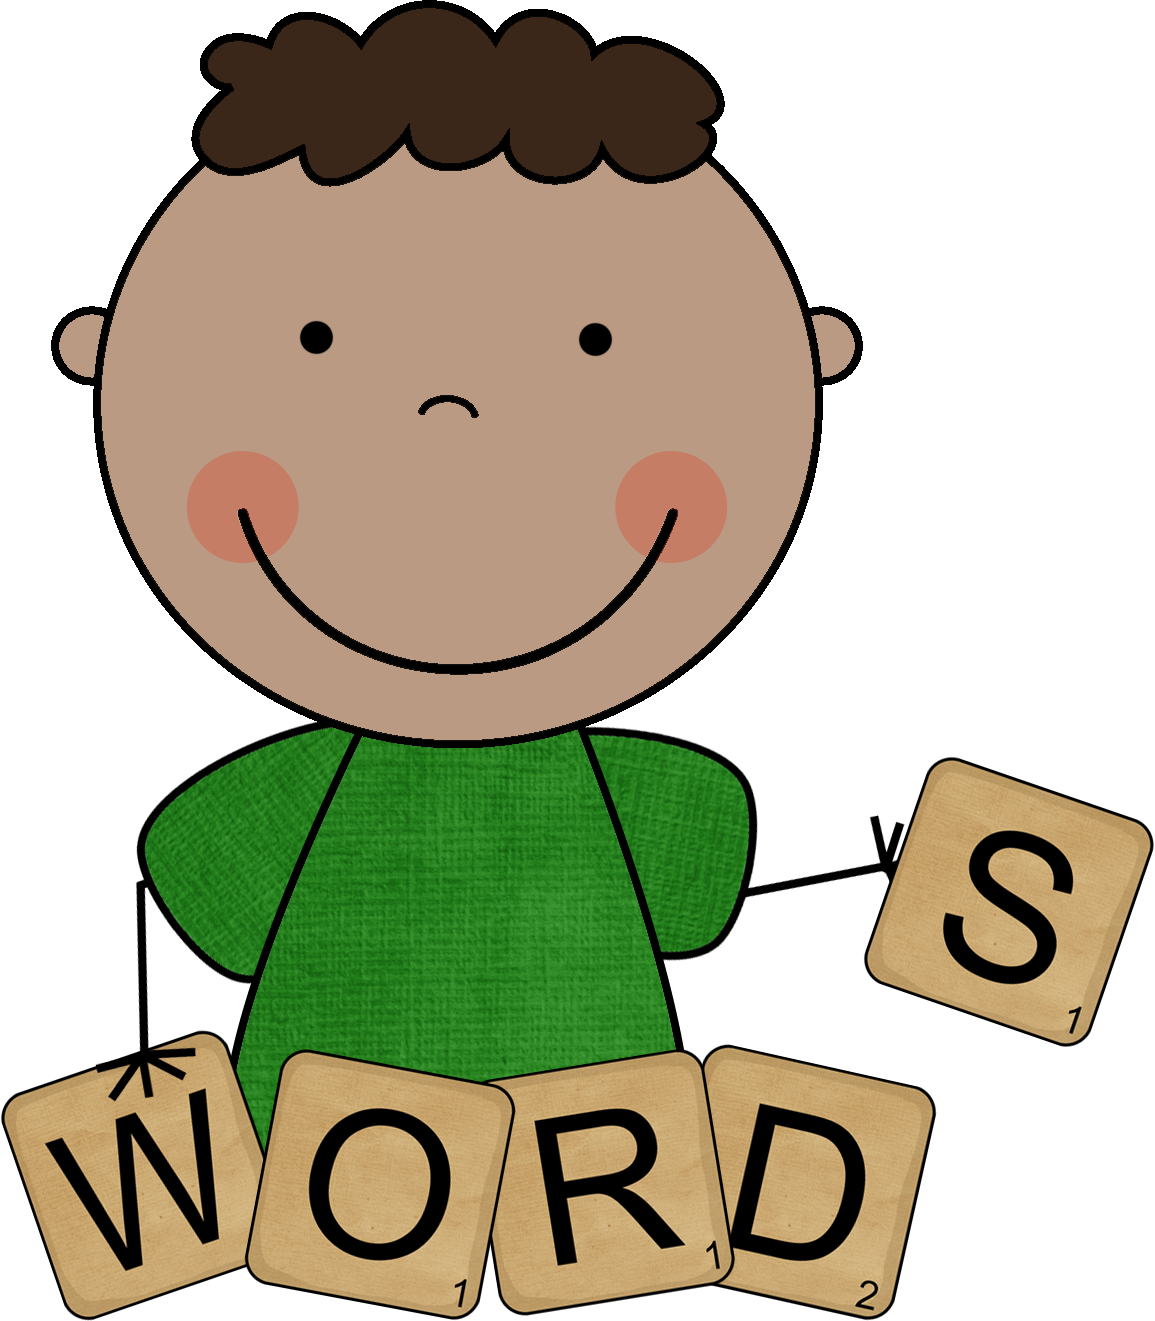 Drawing at getdrawings com. Dictionary clipart vocabulary